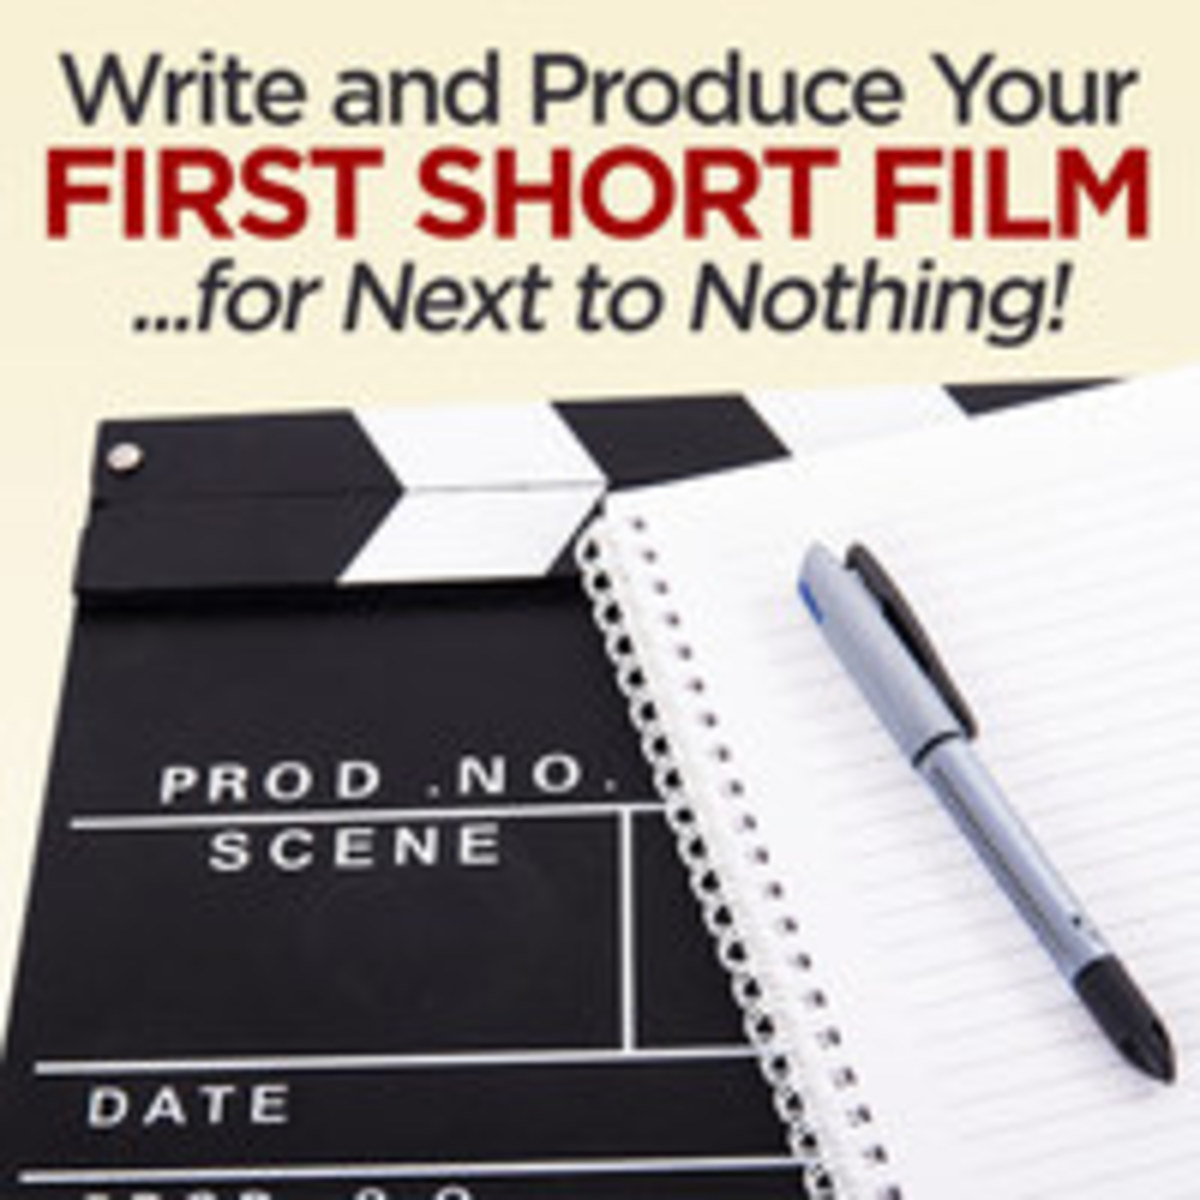 Write and Produce Your First Short Film For Next to Nothing!